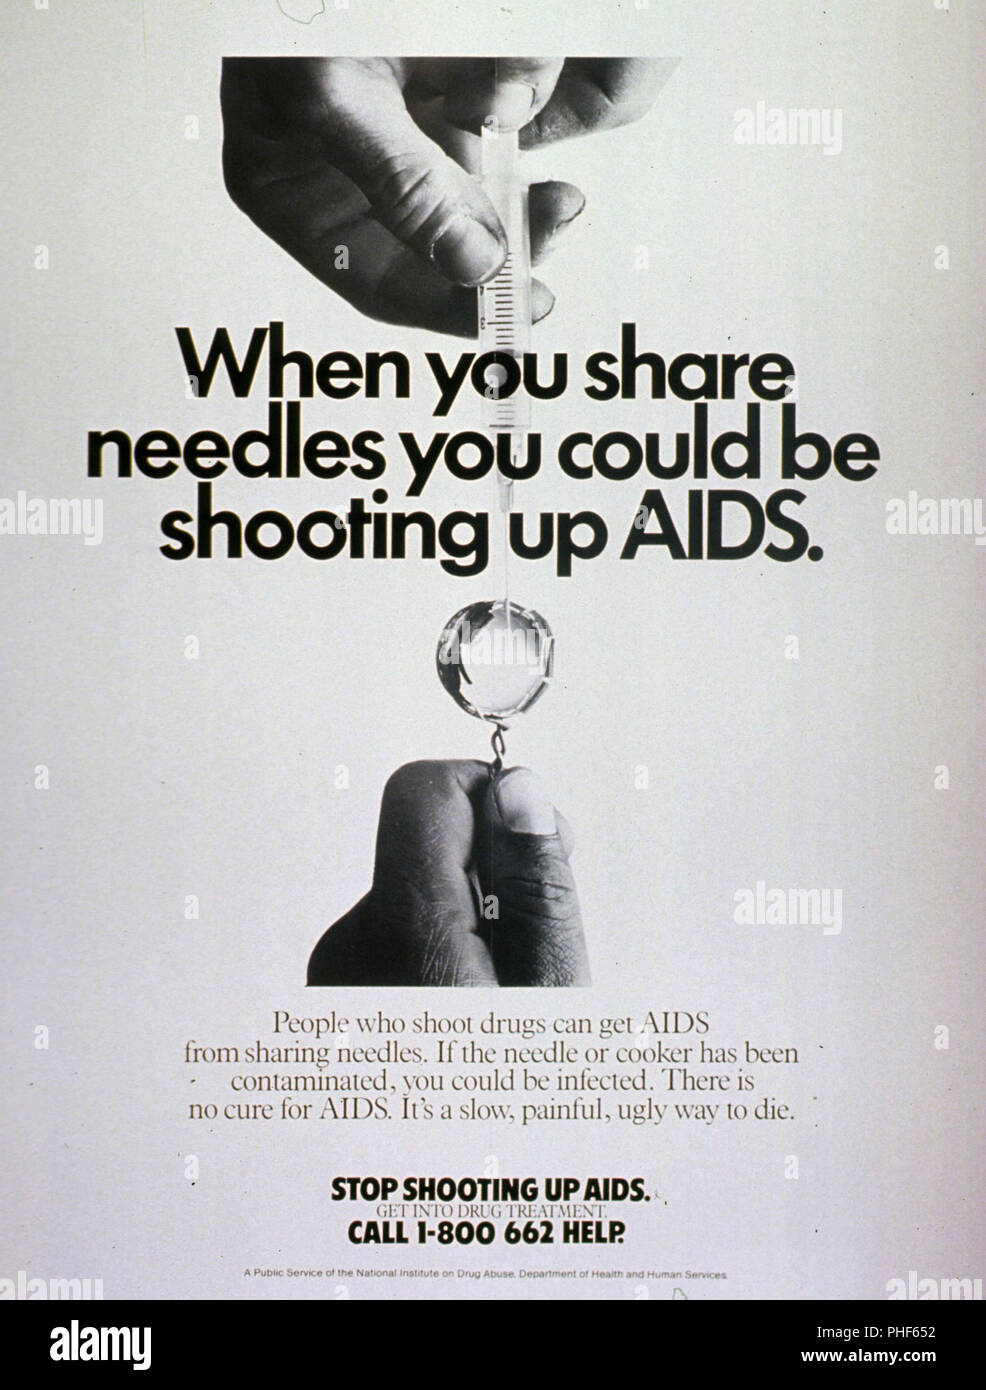 When you share needles you could be shooting up AIDS 1980s AIDS Poster Stock Photo